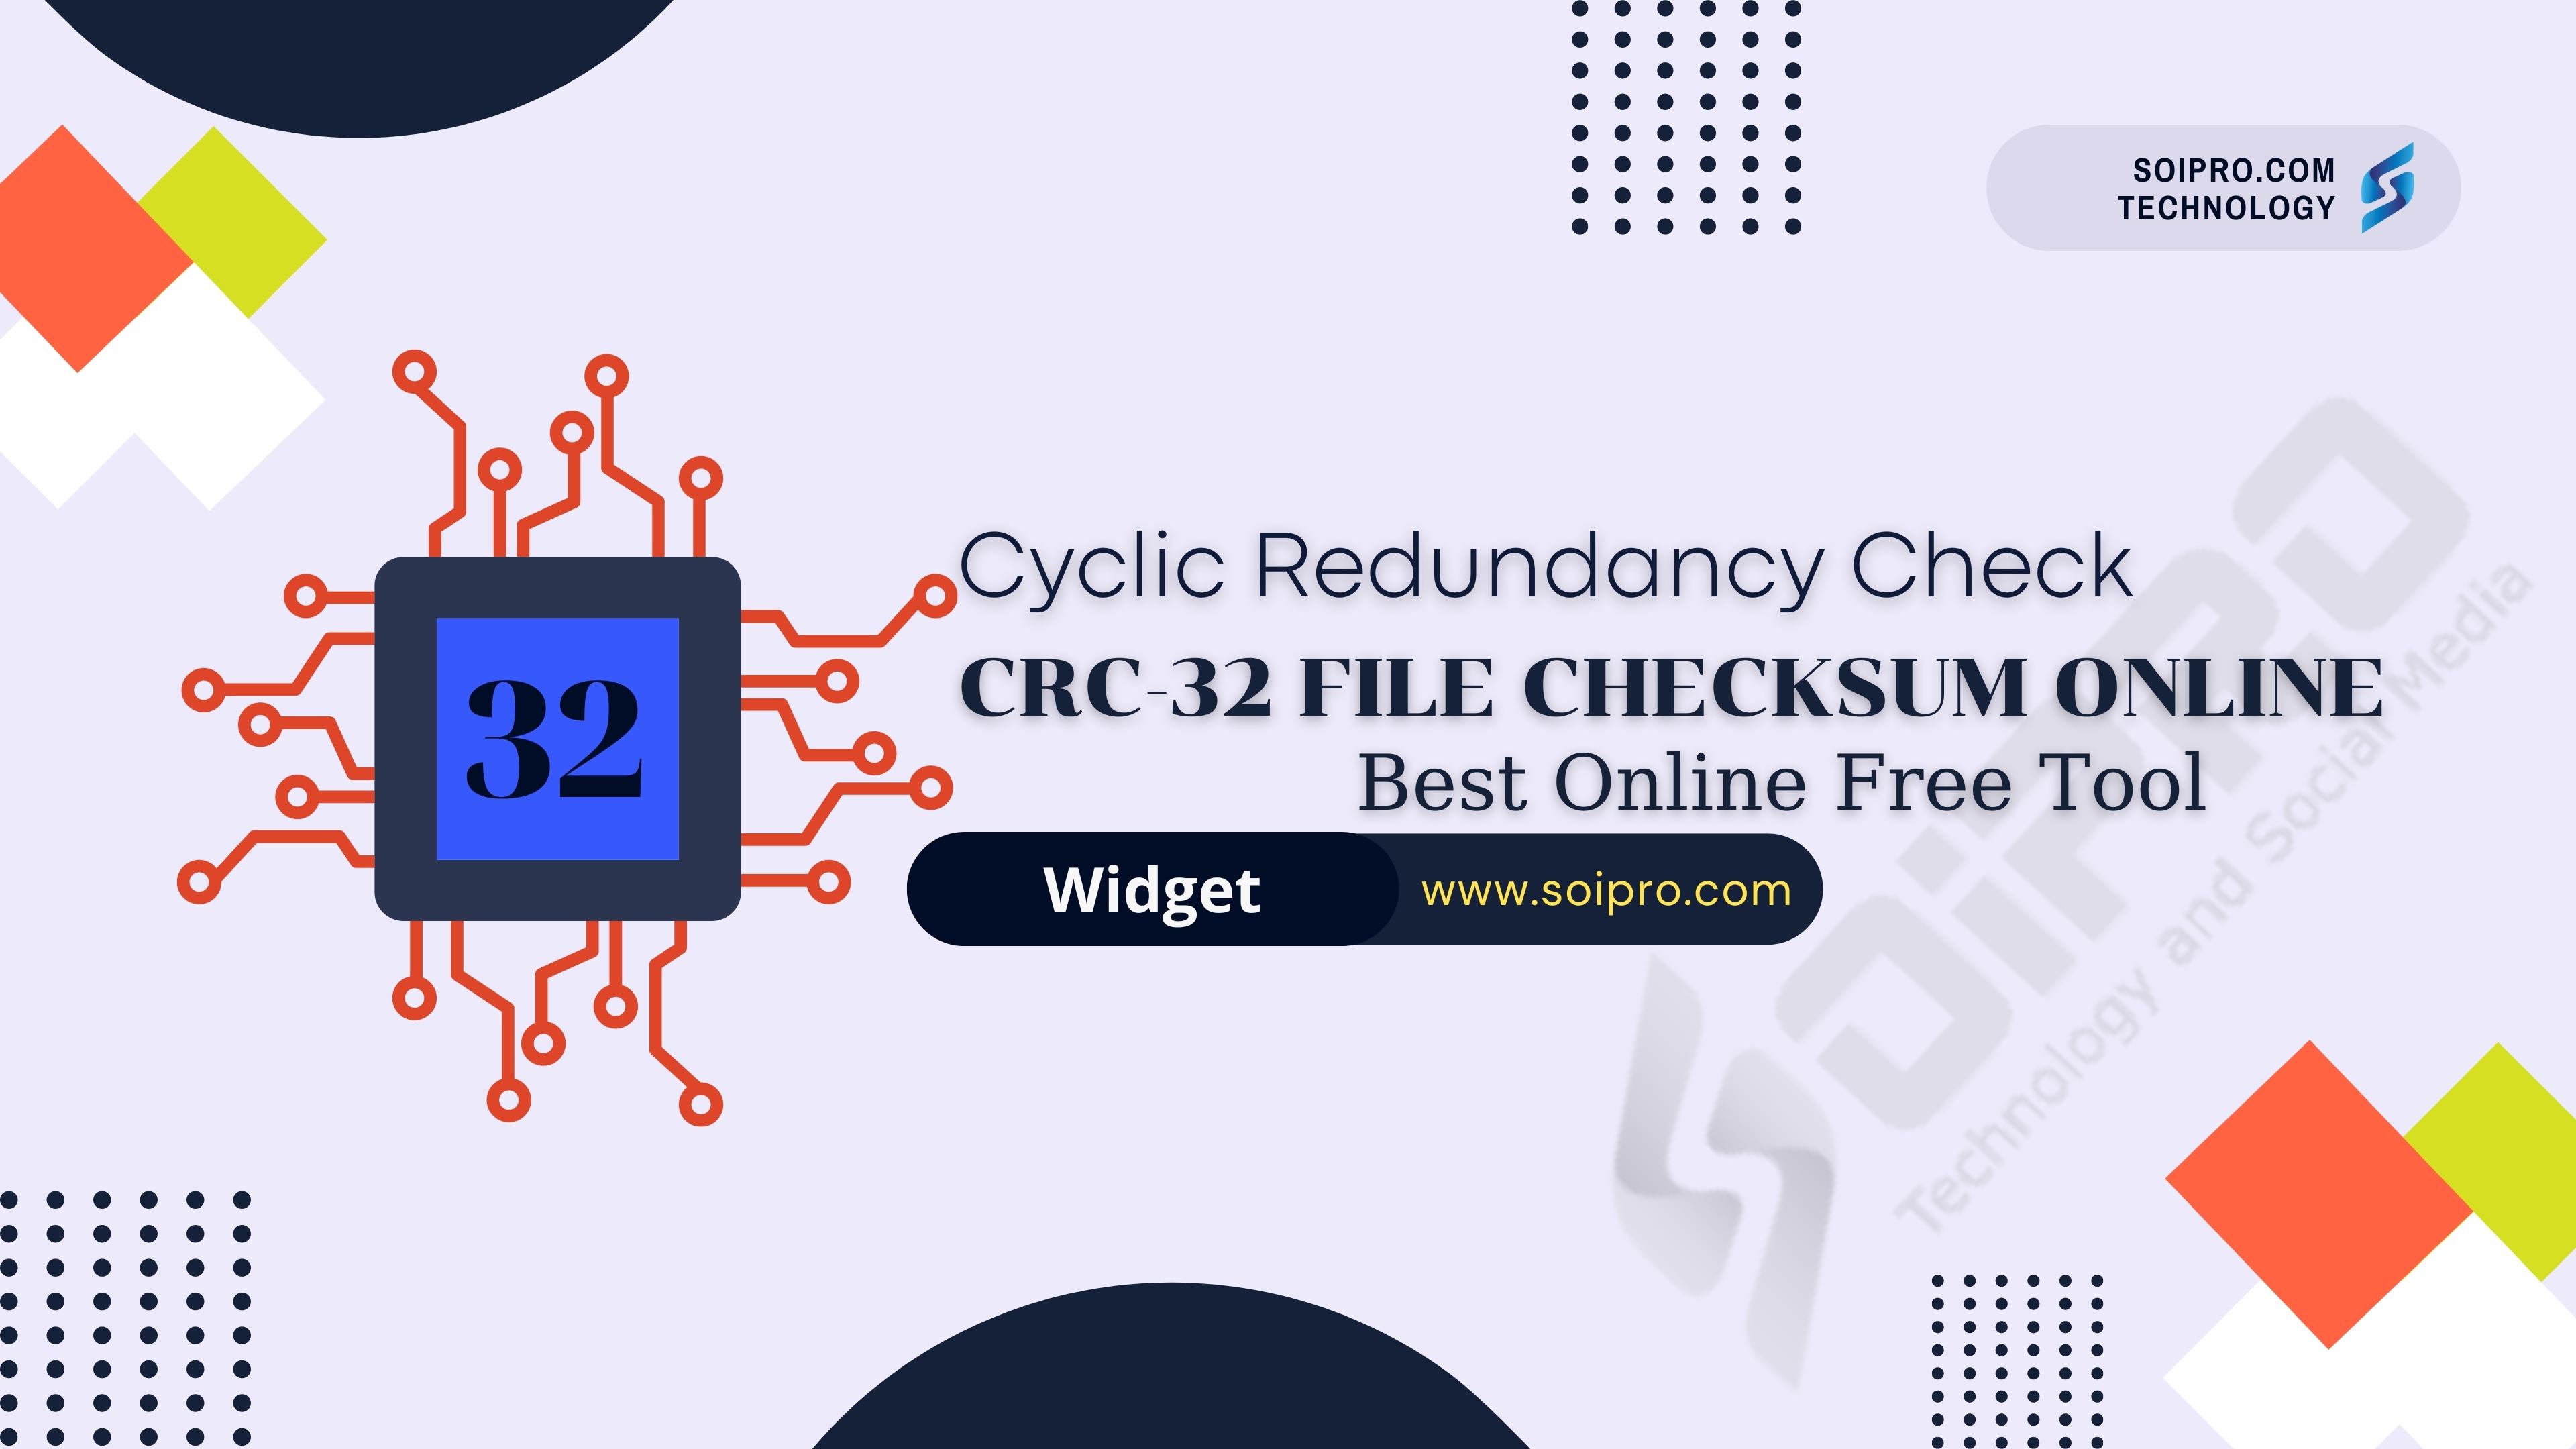 CRC-32 online file checksum function